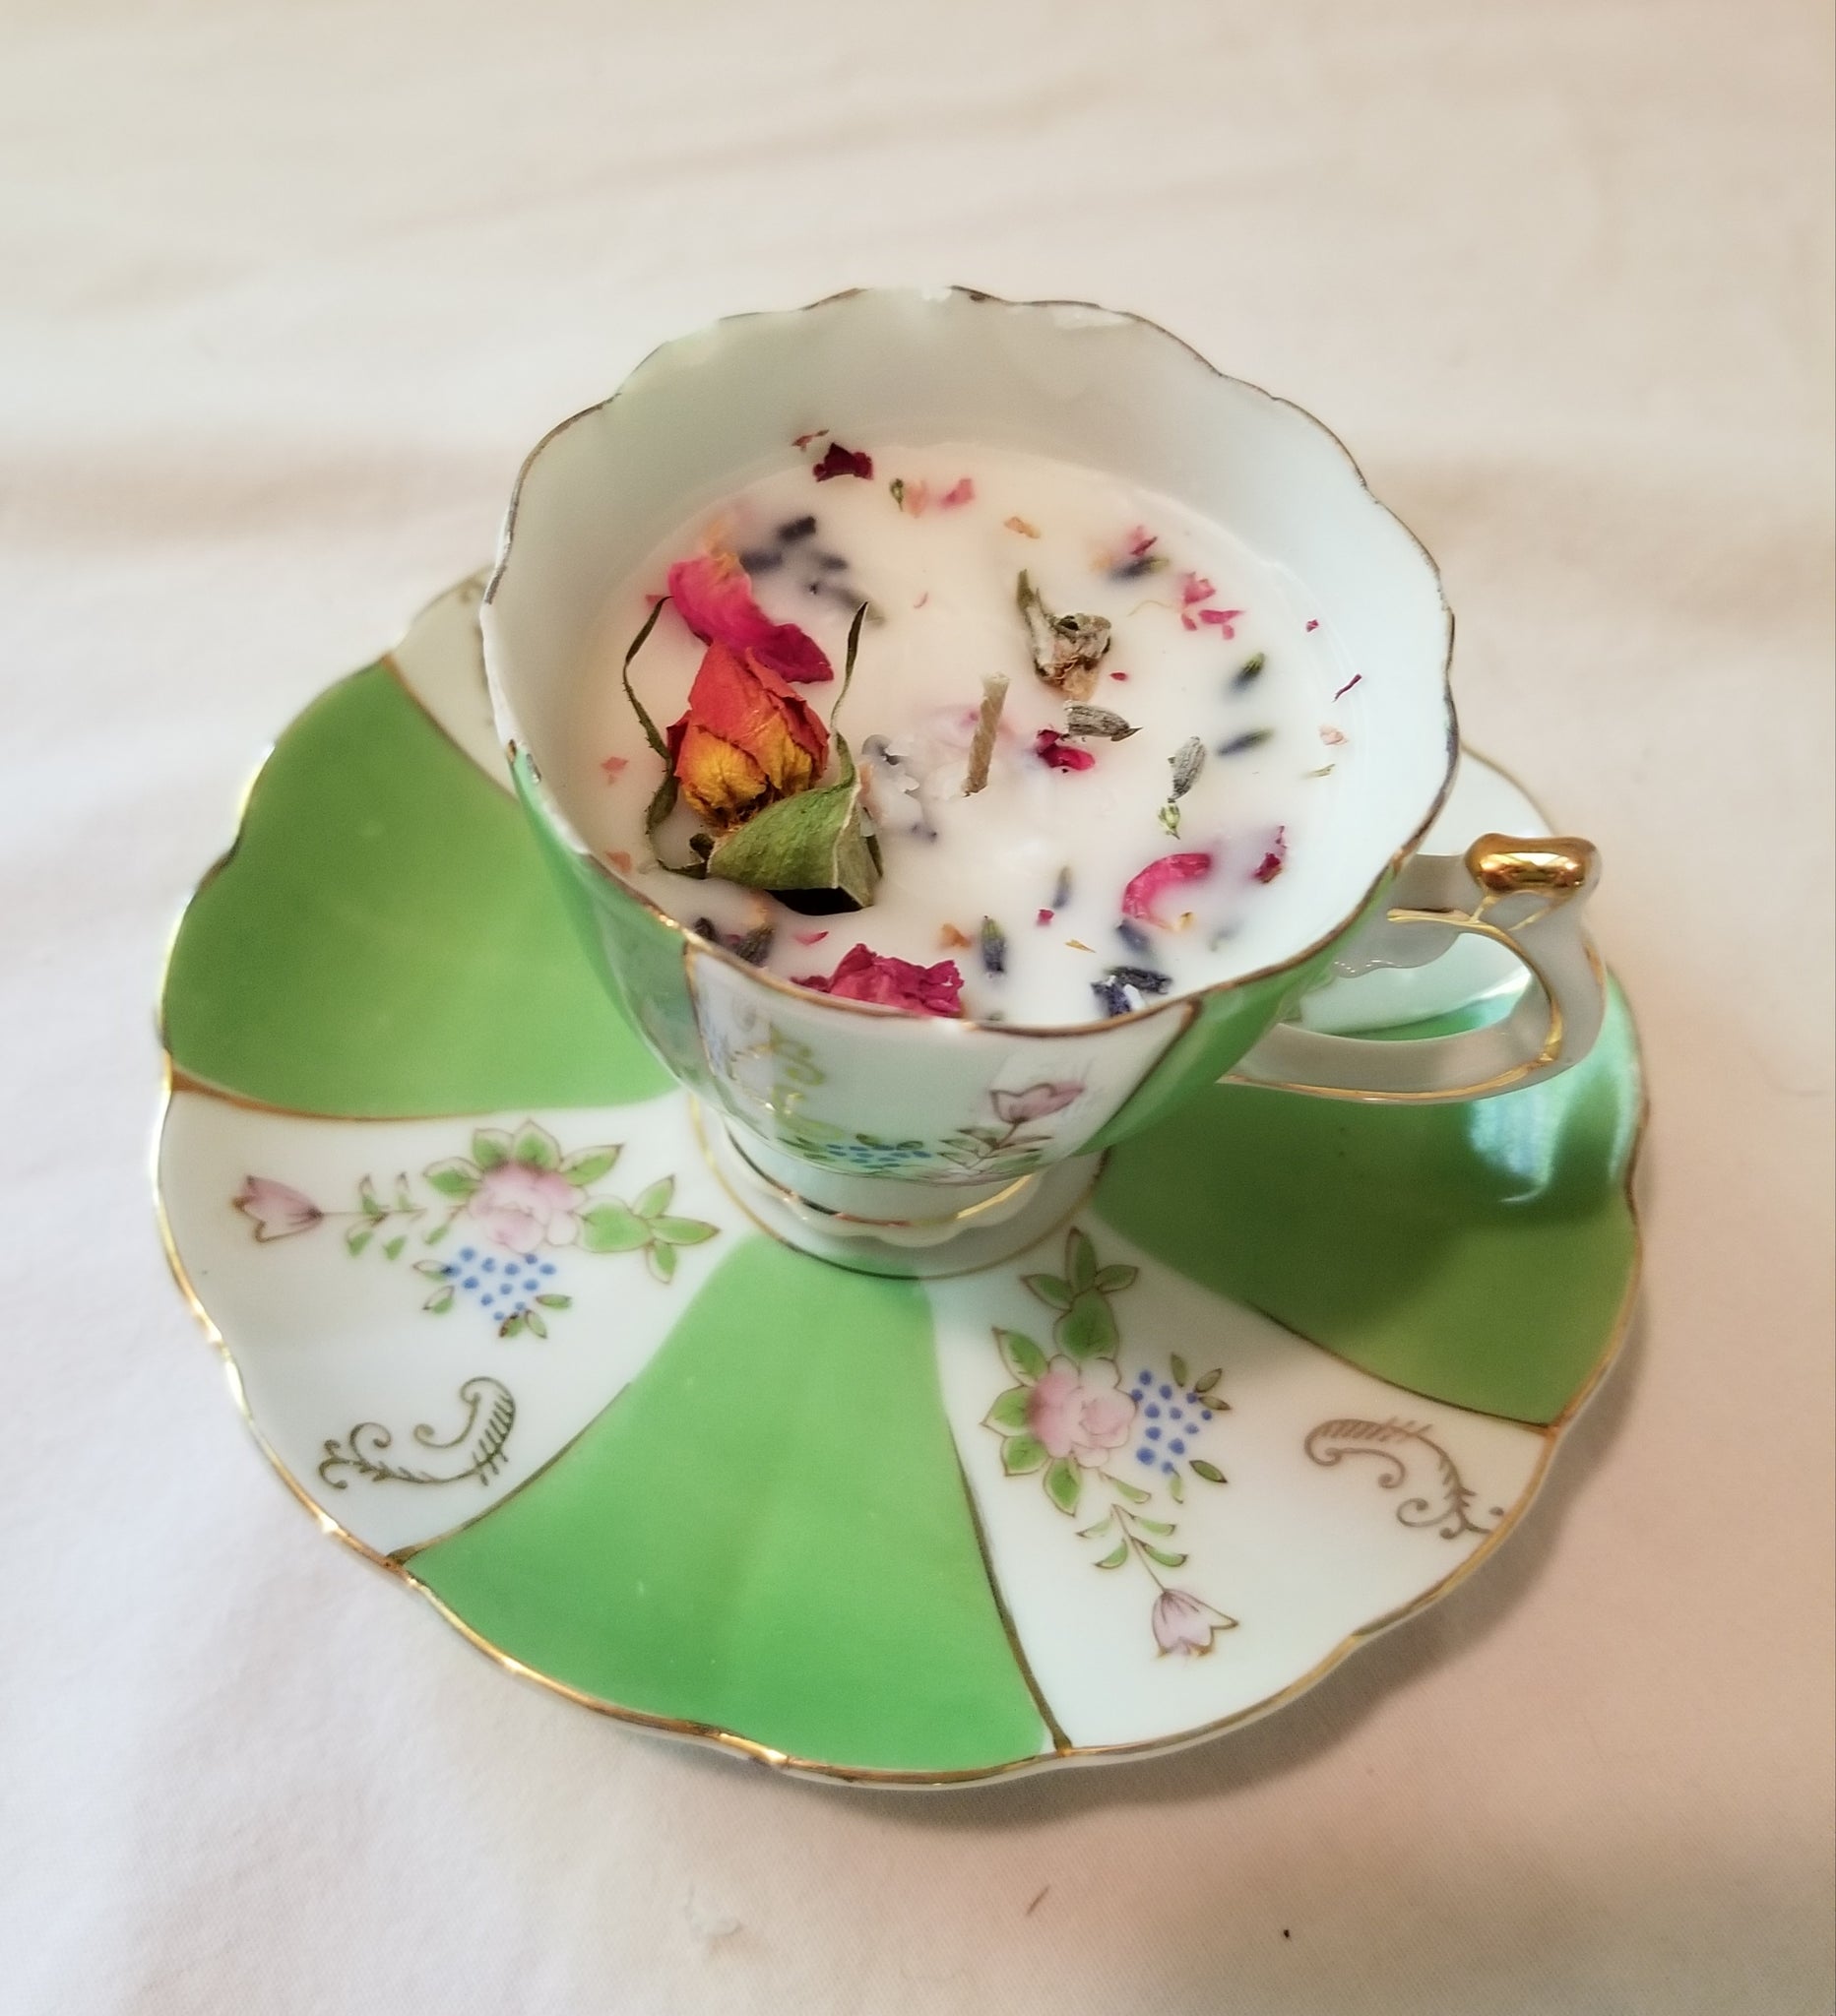 Teacup Candles - Standard and Specialty